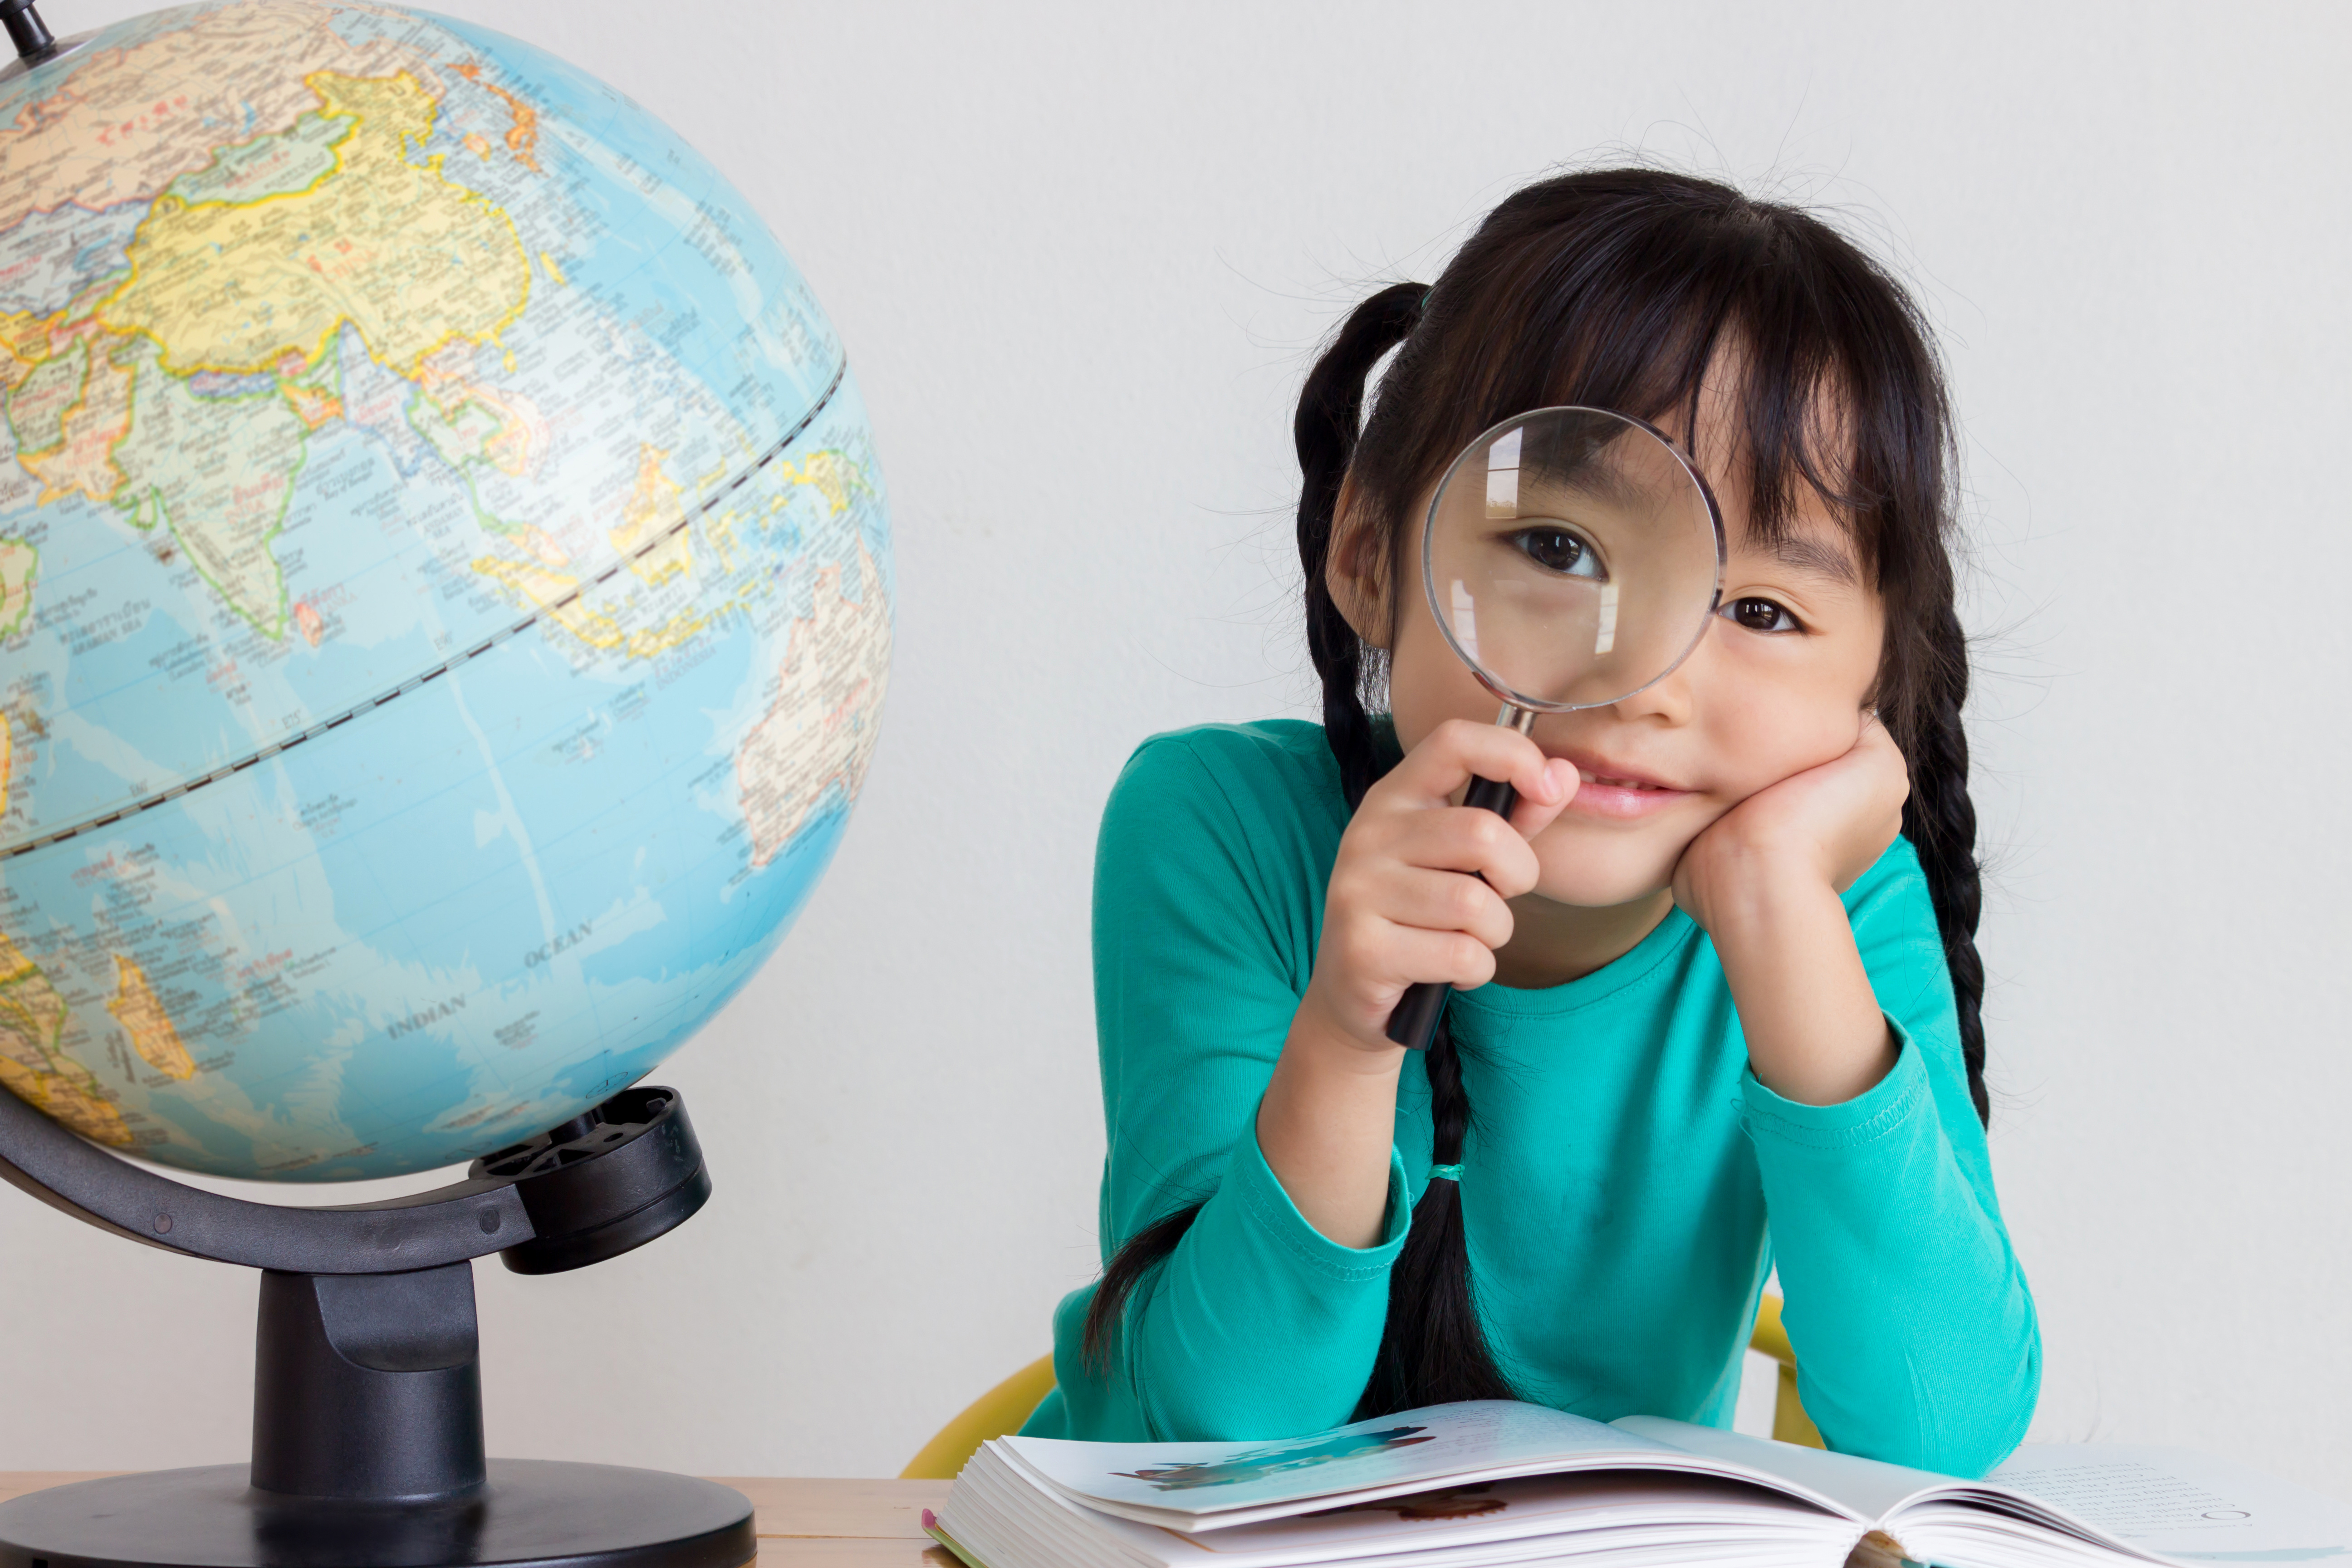 A girl with an open book in front of her is looking at the viewer and holding a magnifying glass to her eye. Next to her on the table is a globe.